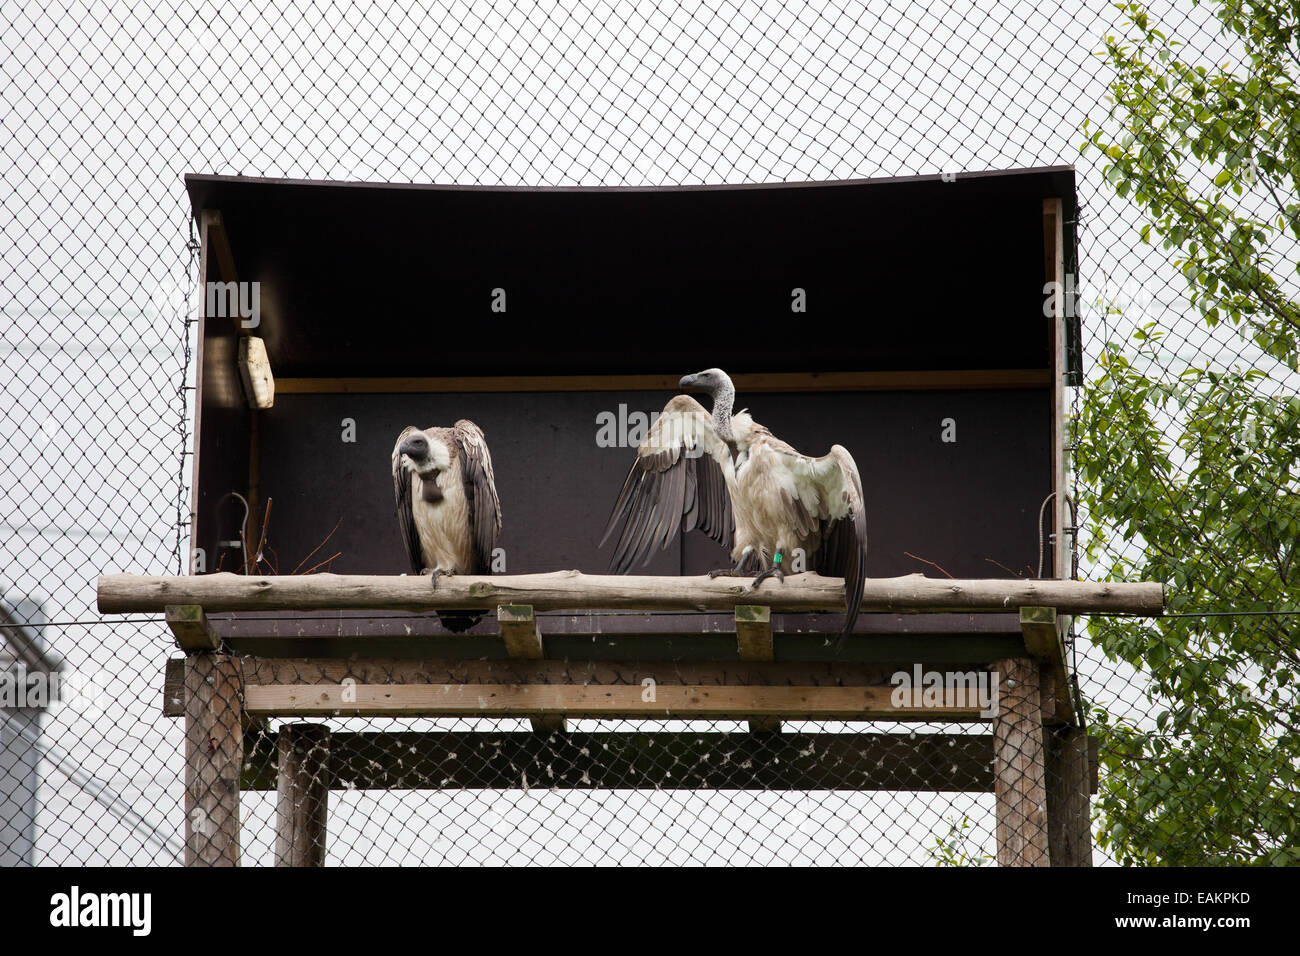 White-backed Vultures (Gyps africanus) in the Rotterdam Zoo (Diergaarde Blijdorp) in Holland, Netherlands. Stock Photo